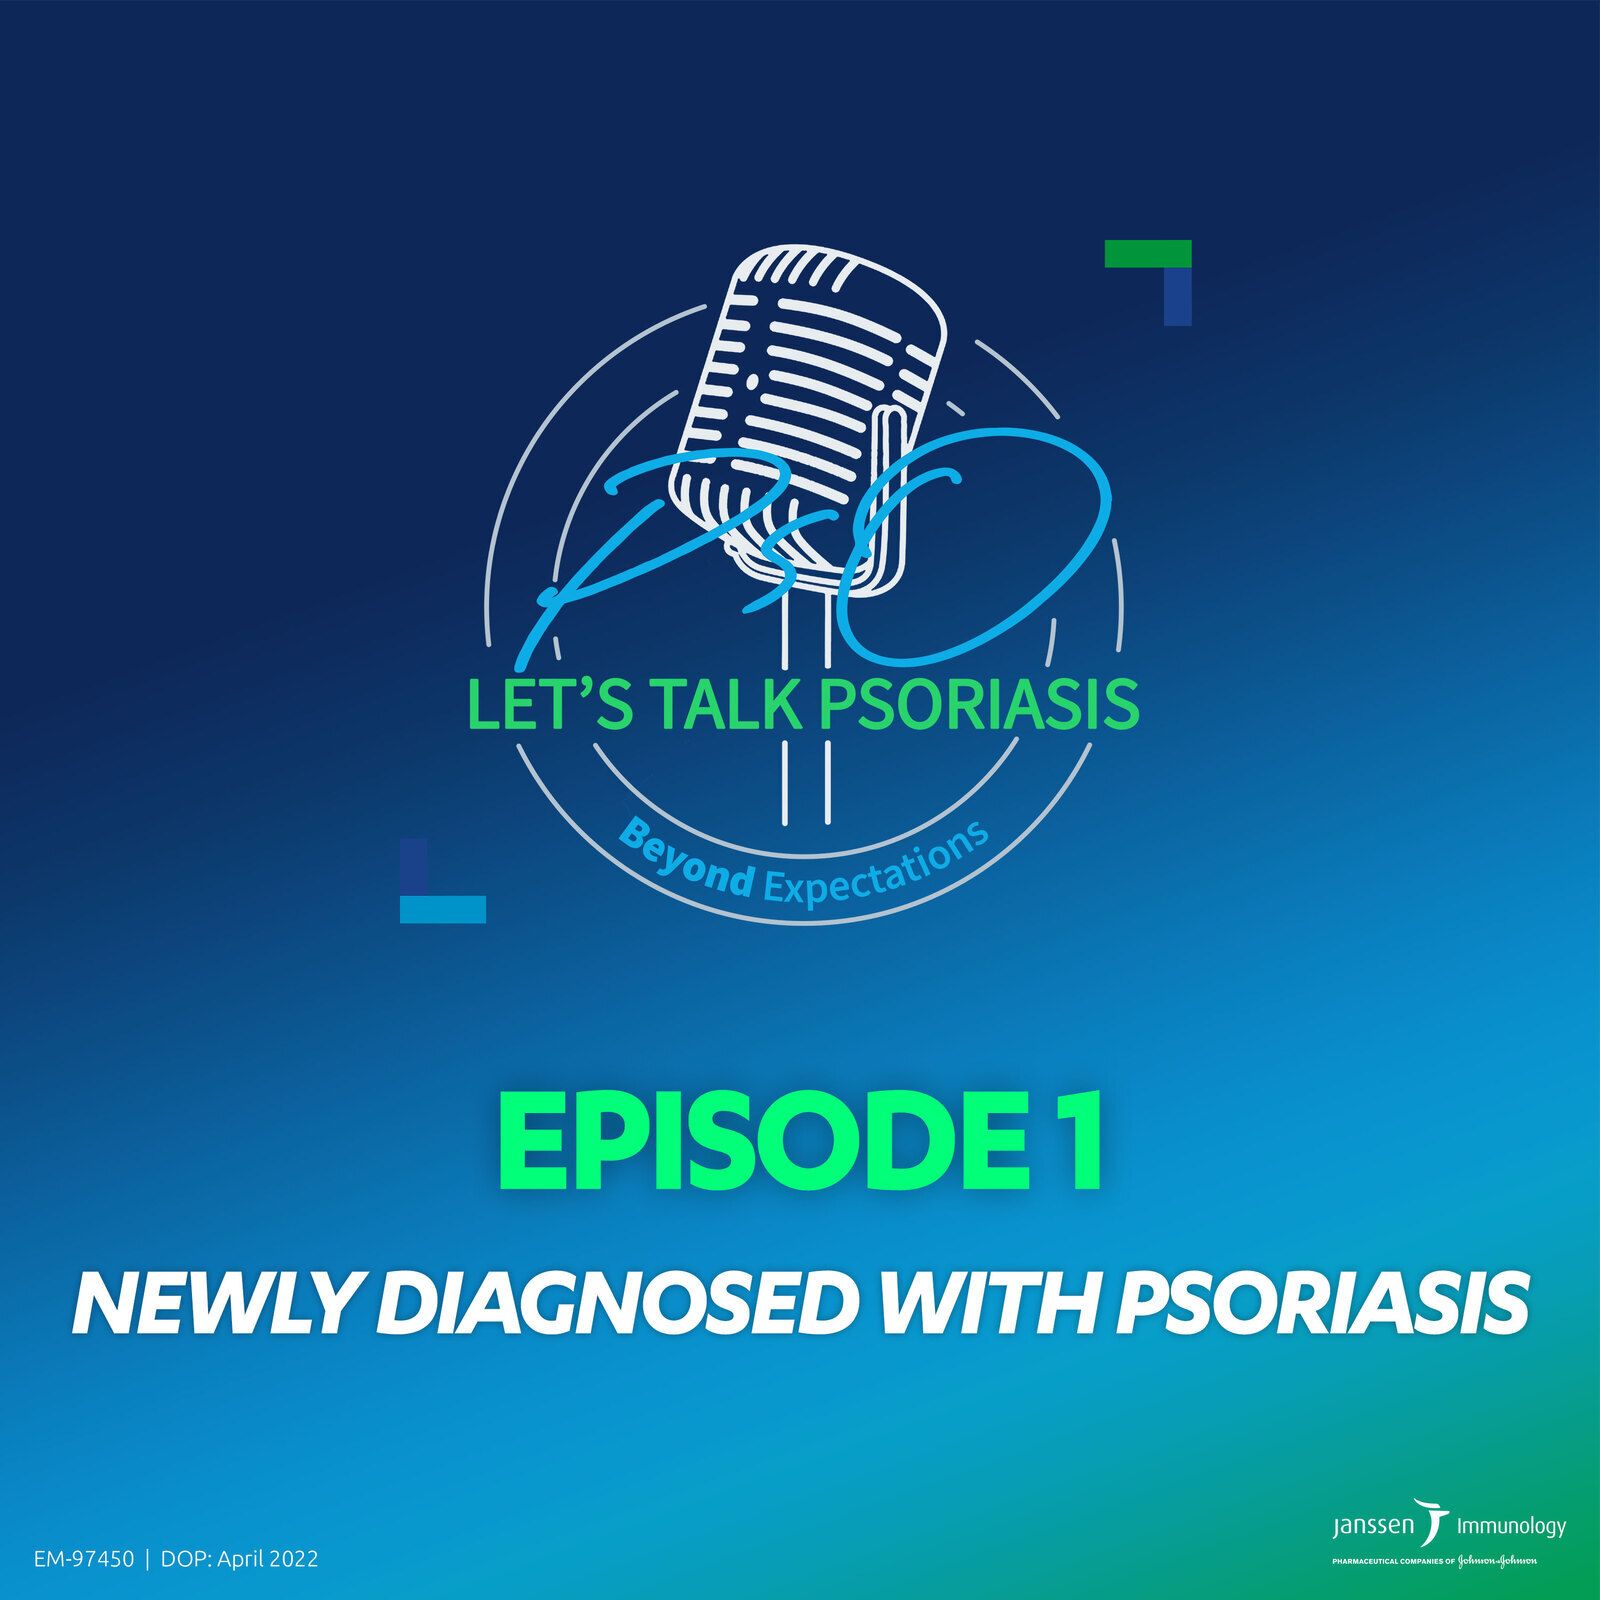 1: Episode 1 - Newly diagnosed with psoriasis